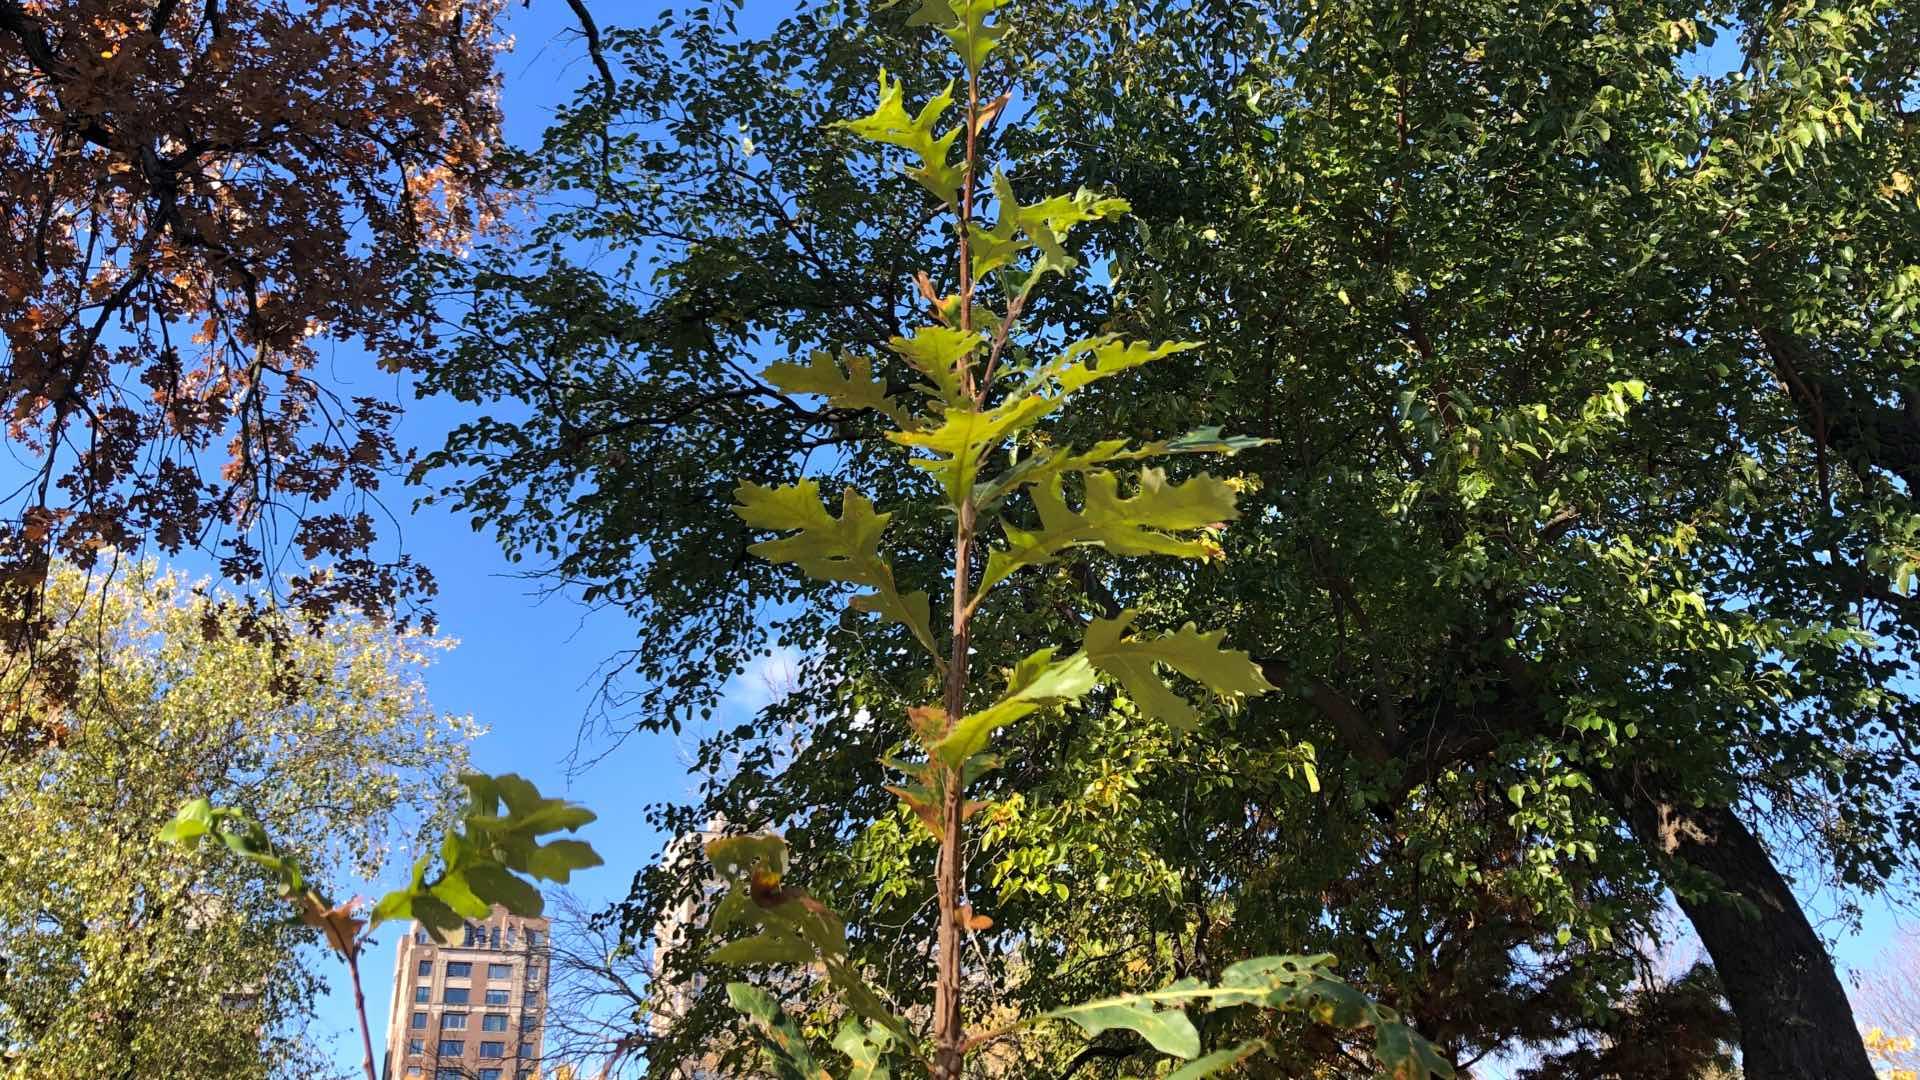 A baby bur oak has sprung up on its own at Lincoln Park Zoo. Slow-growing oaks are said to be trees "to plant for future generations." (Patty Wetli / WTTW News)